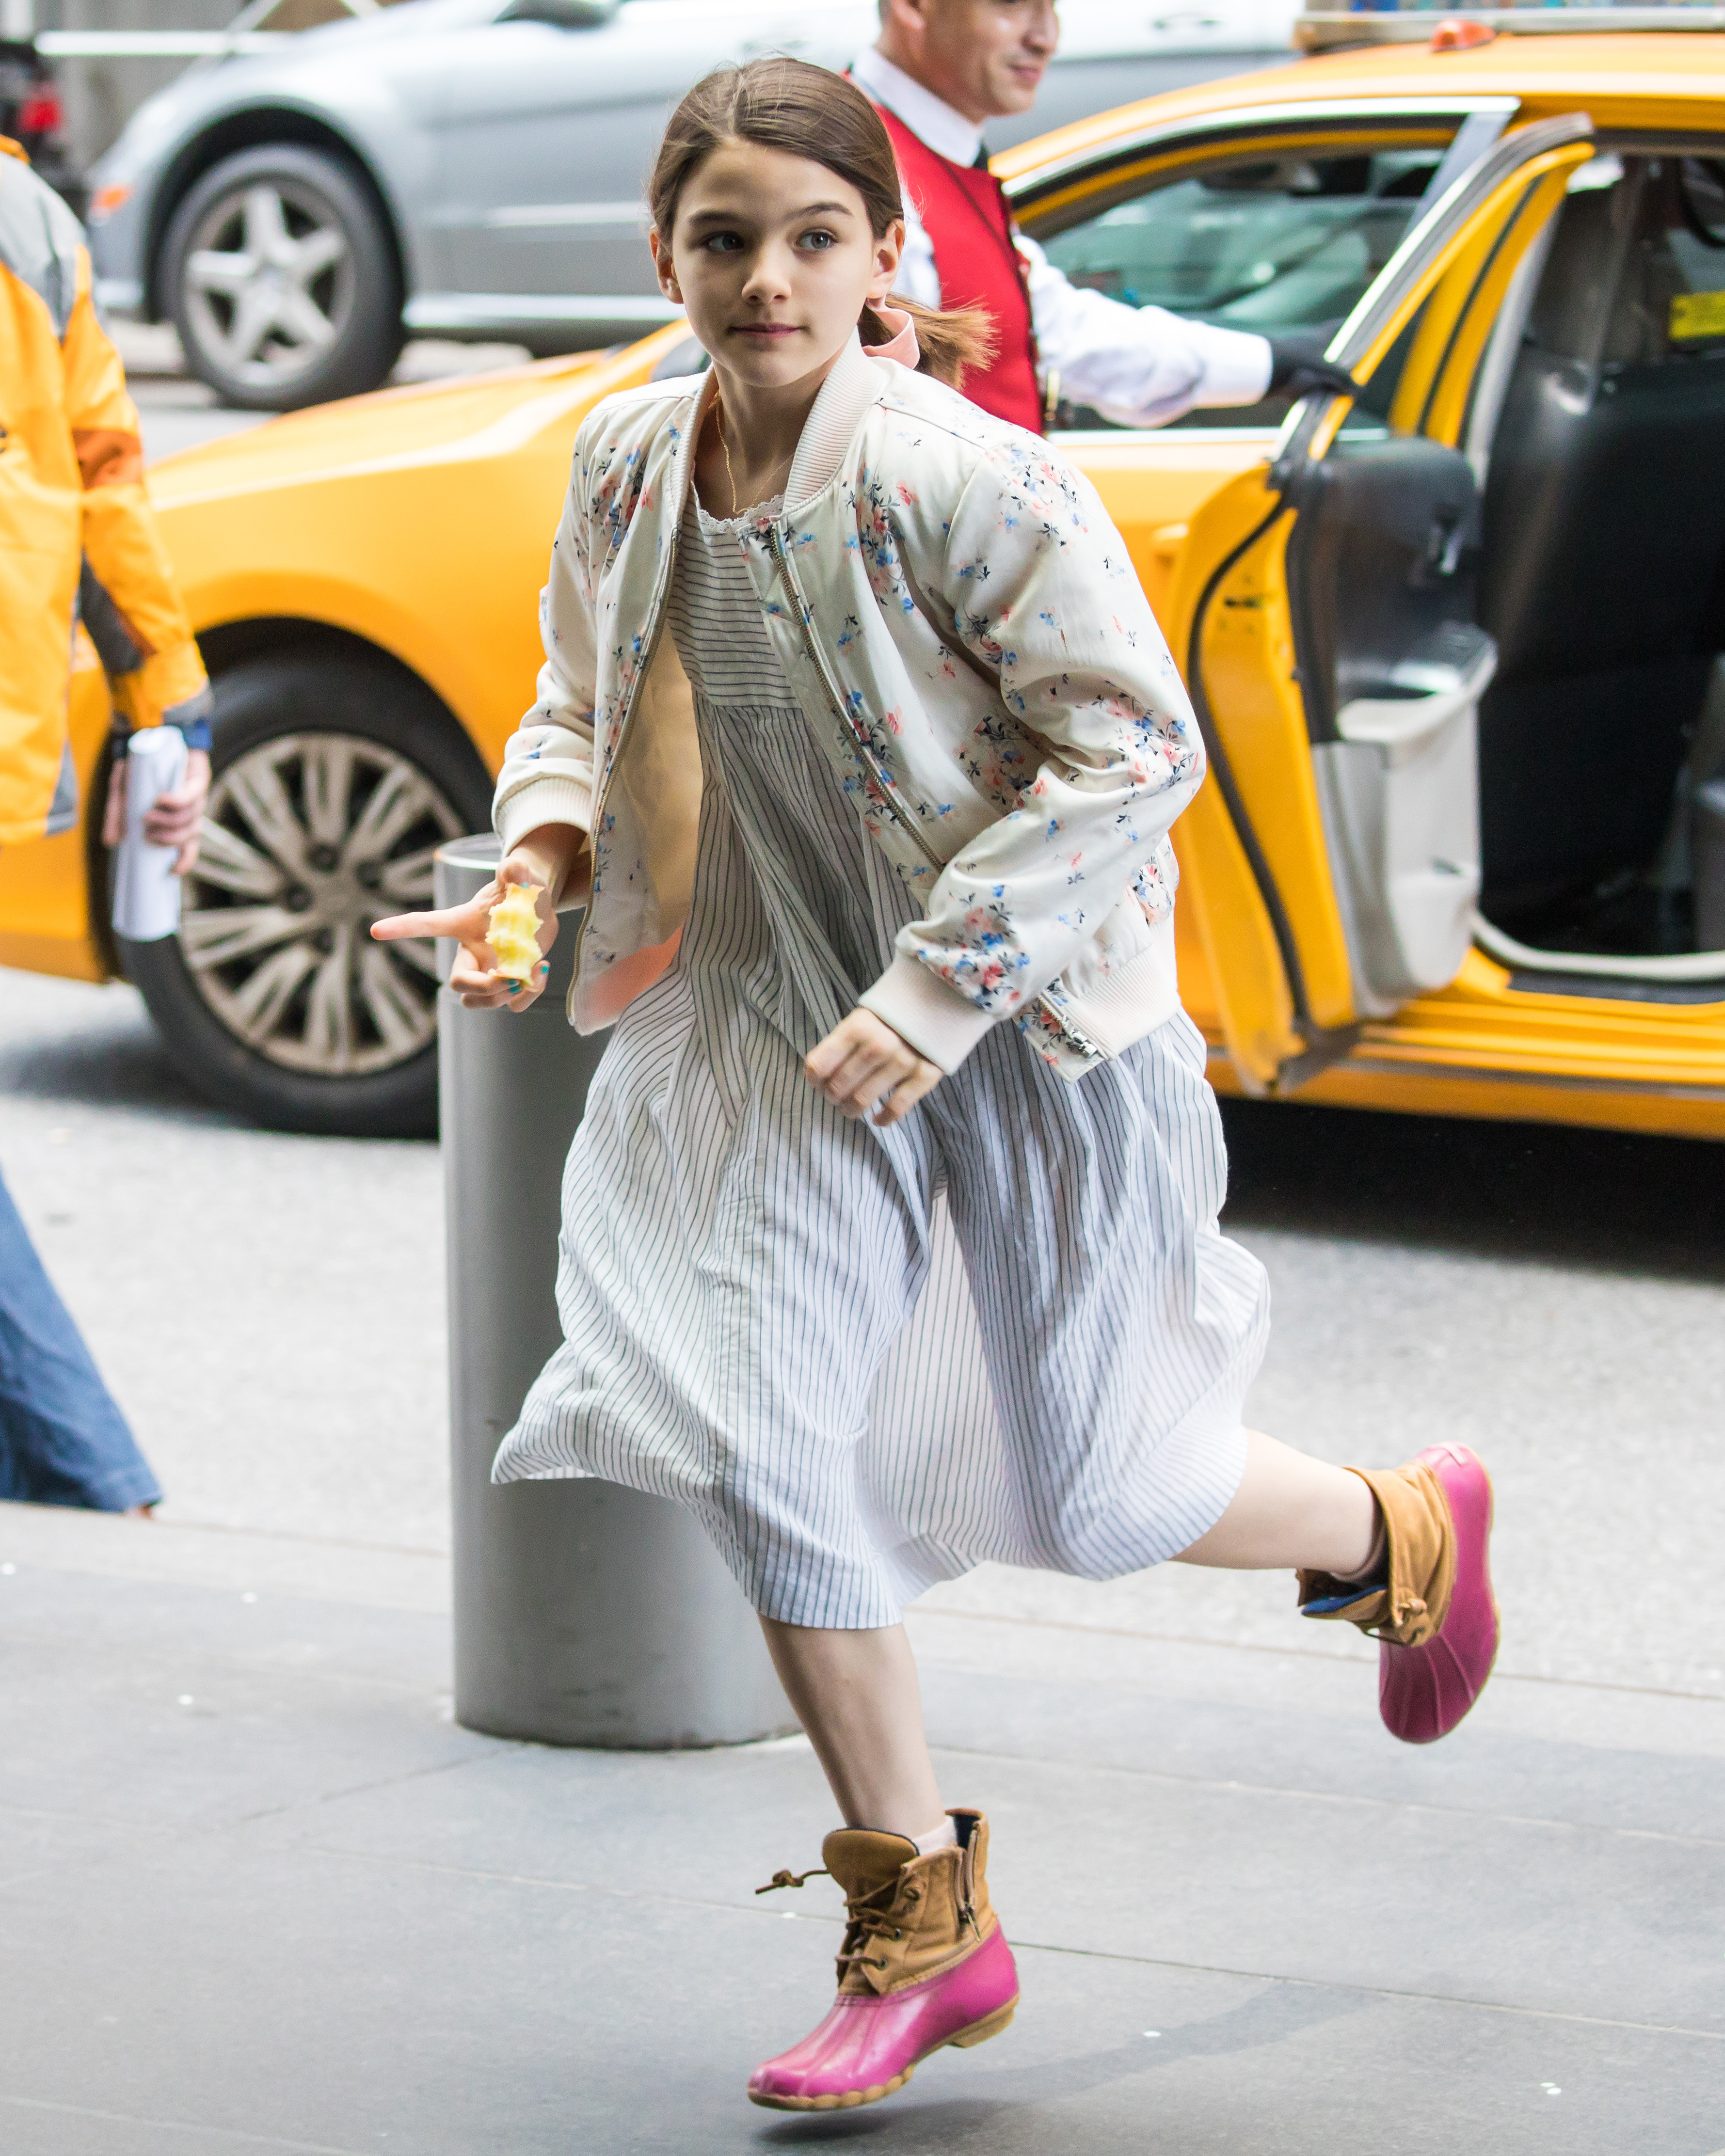 Suri Cruise seen arriving at her hotel on April 28, 2018 in New York. | Source: Getty Images